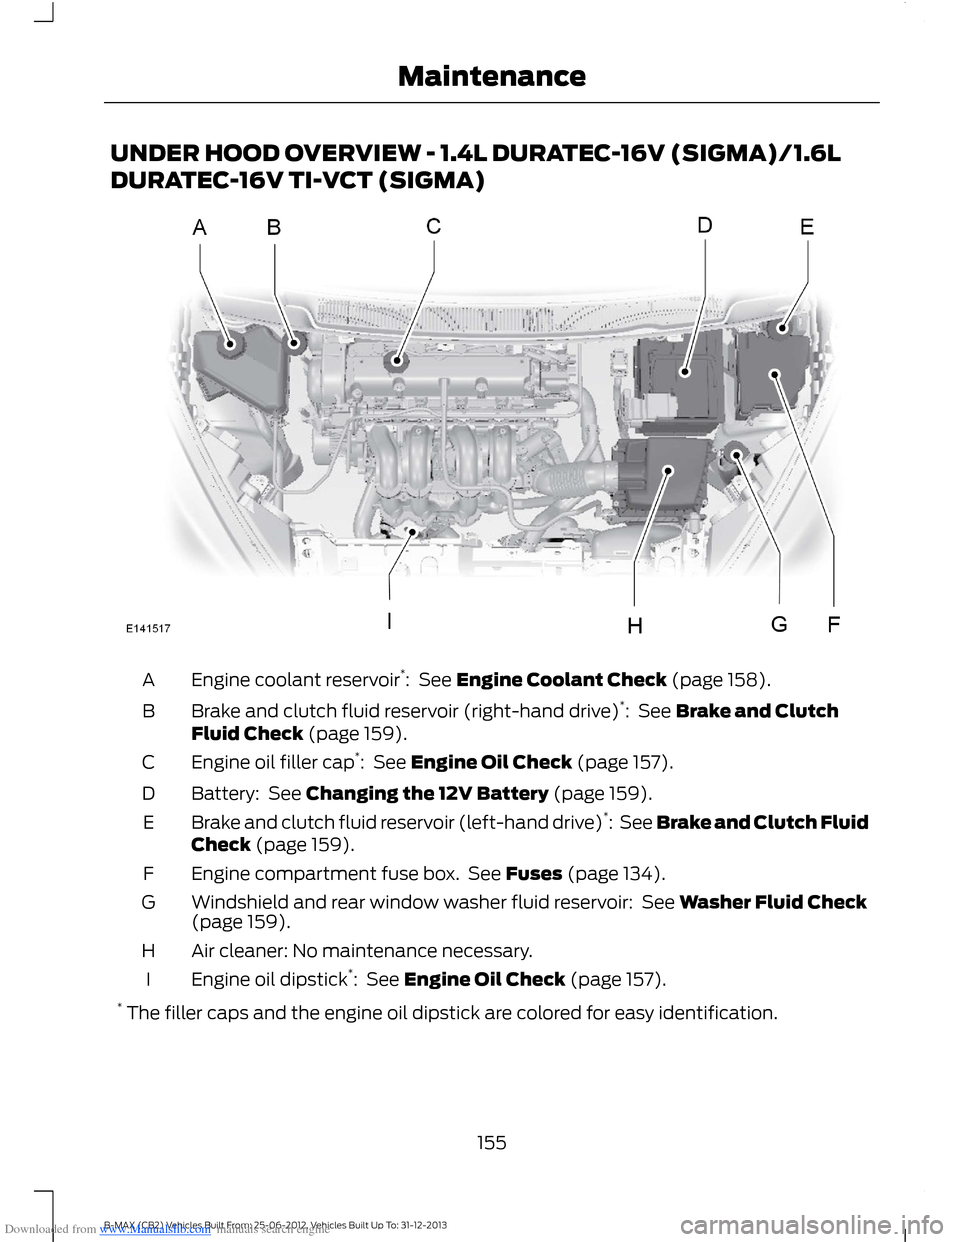 FORD B MAX 2013 1.G User Guide Downloaded from www.Manualslib.com manuals search engine UNDER HOOD OVERVIEW - 1.4L DURATEC-16V (SIGMA)/1.6L
DURATEC-16V TI-VCT (SIGMA)
Engine coolant reservoir*:  See Engine Coolant Check (page 158).